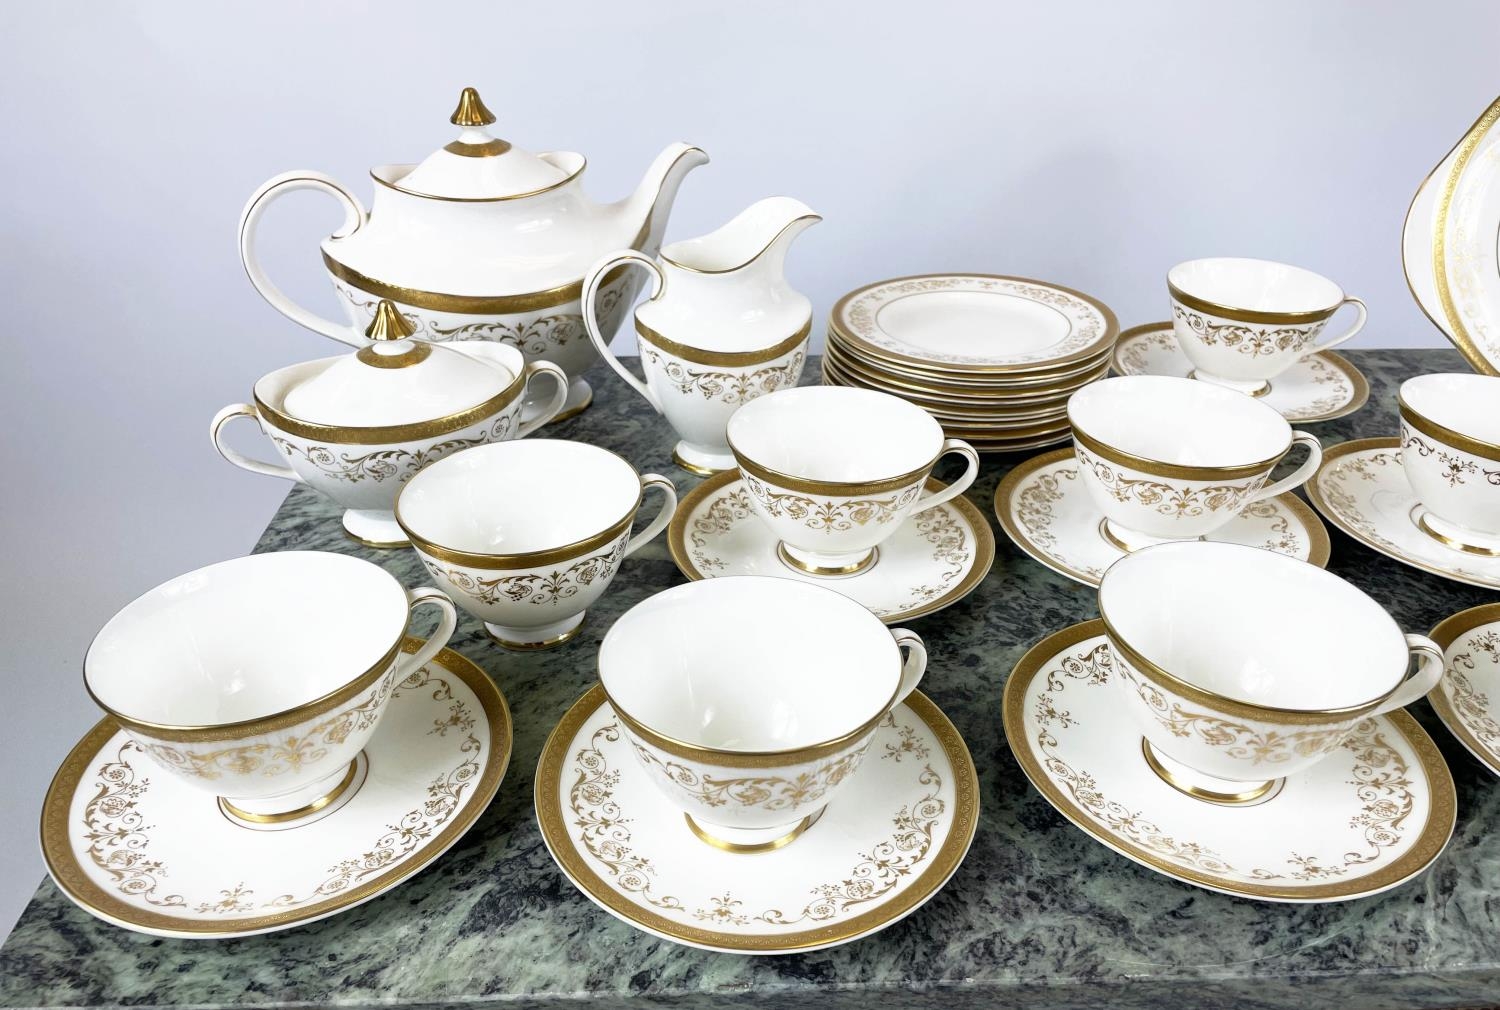 TEA SERVICE, Royal Doulton Belmount pattern including 13 tea cups and 12 saucers, 11 plates - Image 2 of 7